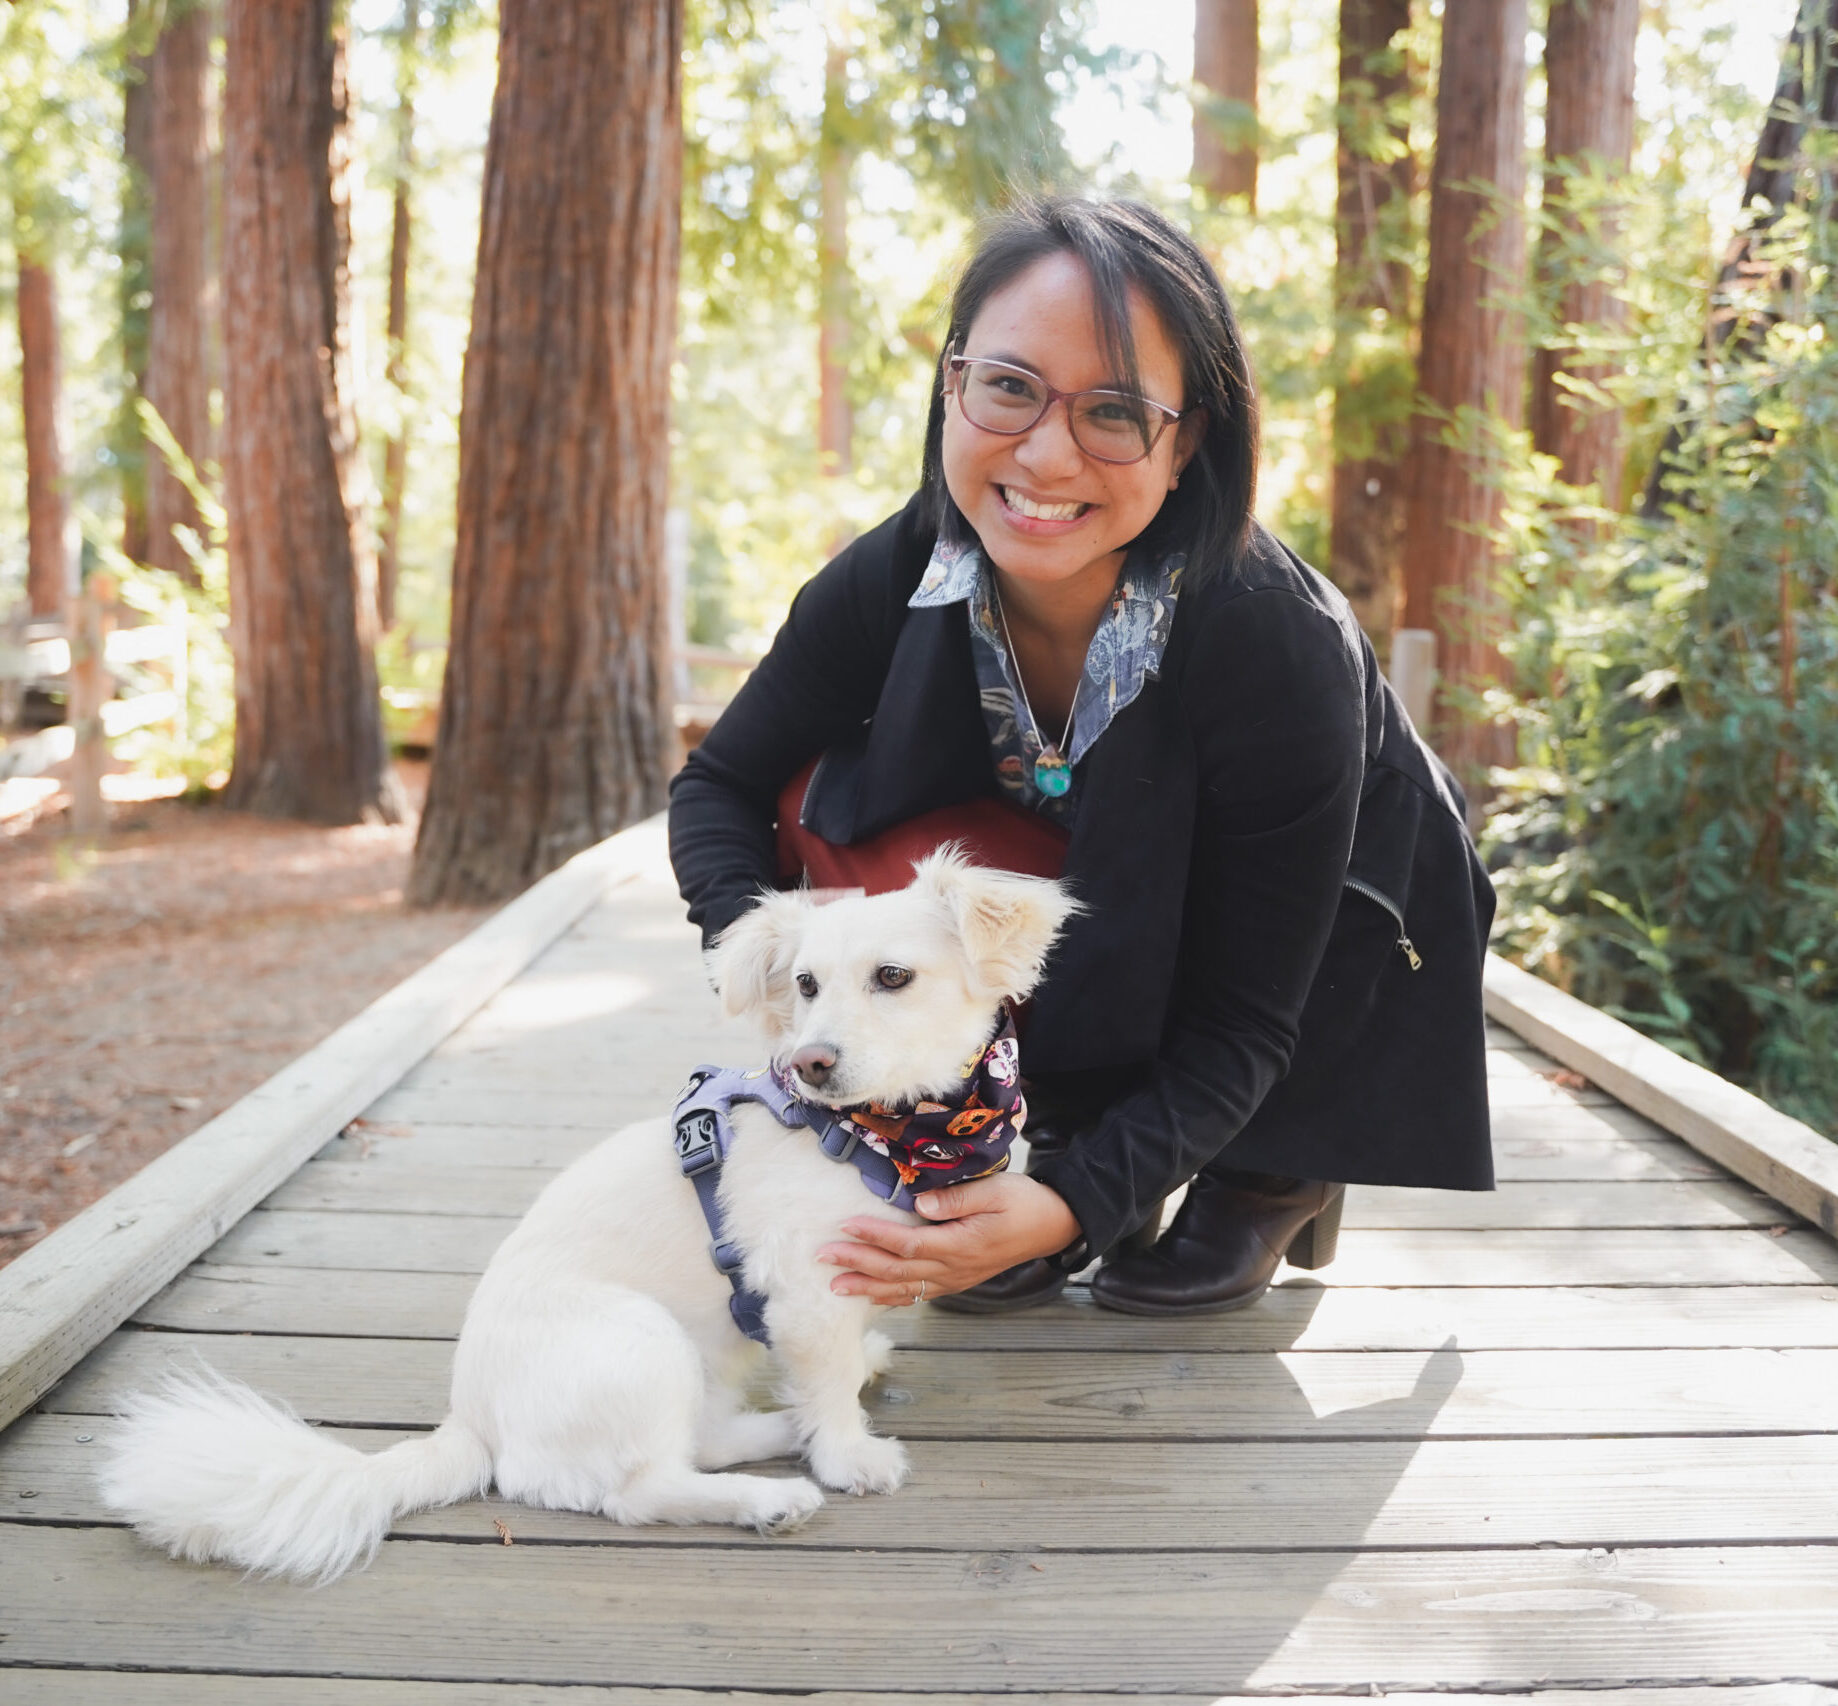 Jean poses with her dog, Chloe; redwoods can be seen in the background